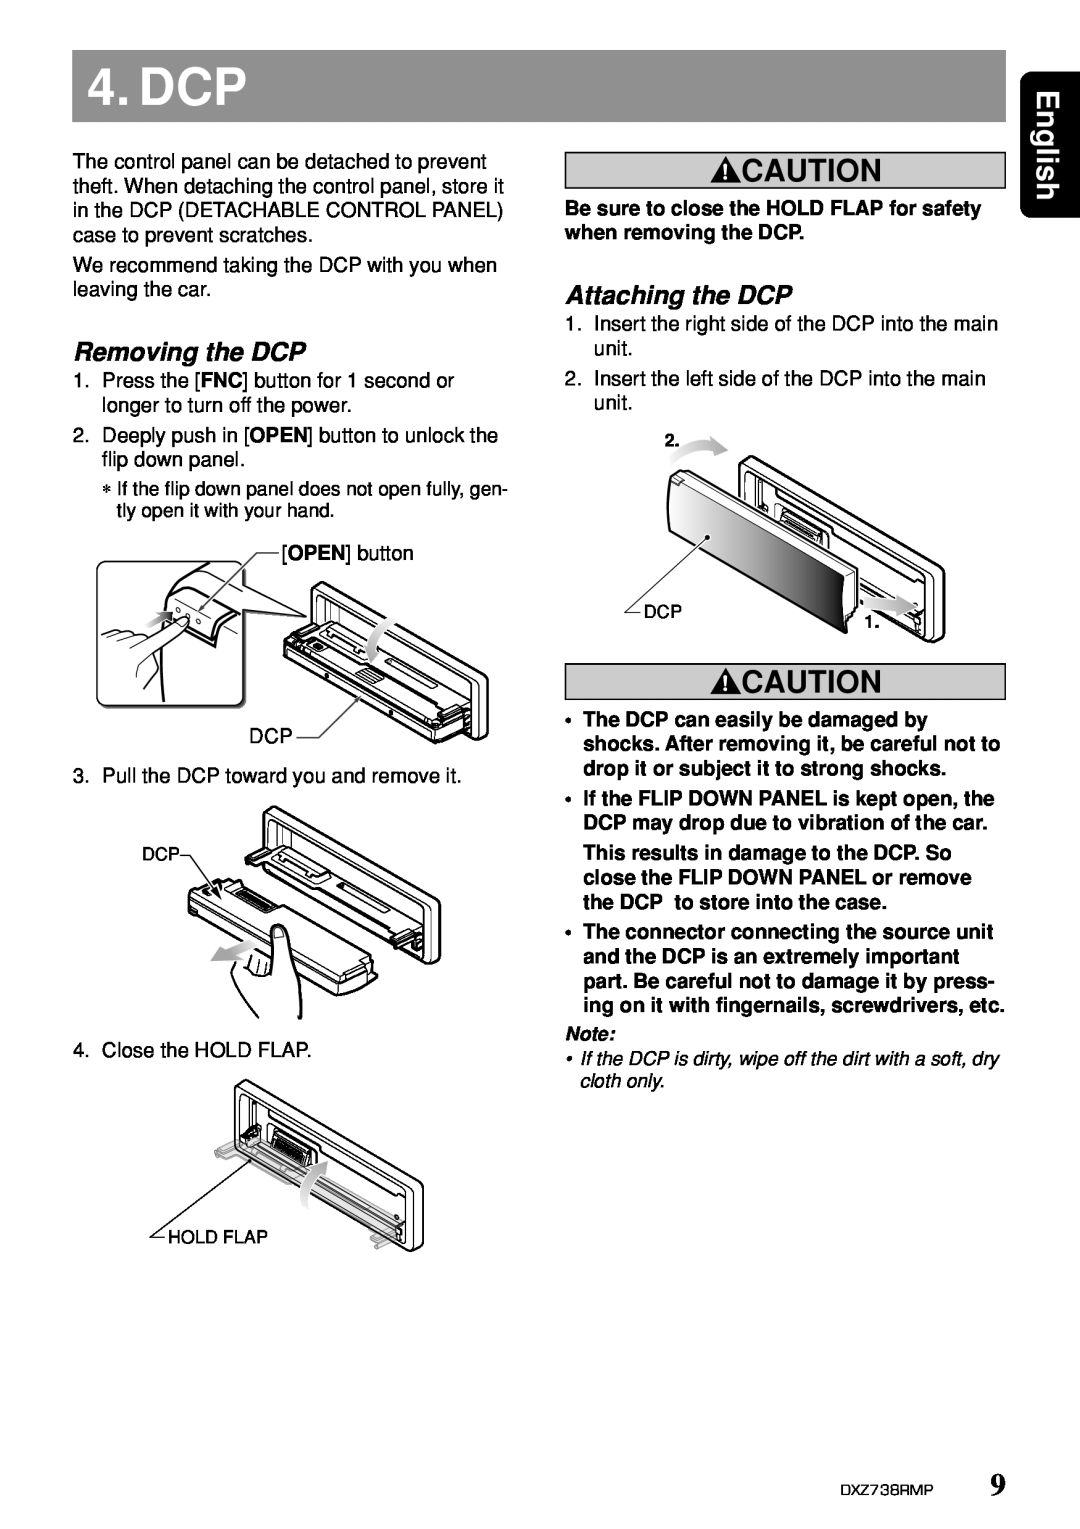 Clarion dxz738rmp owner manual Dcp, Removing the DCP, Attaching the DCP, English, when removing the DCP 